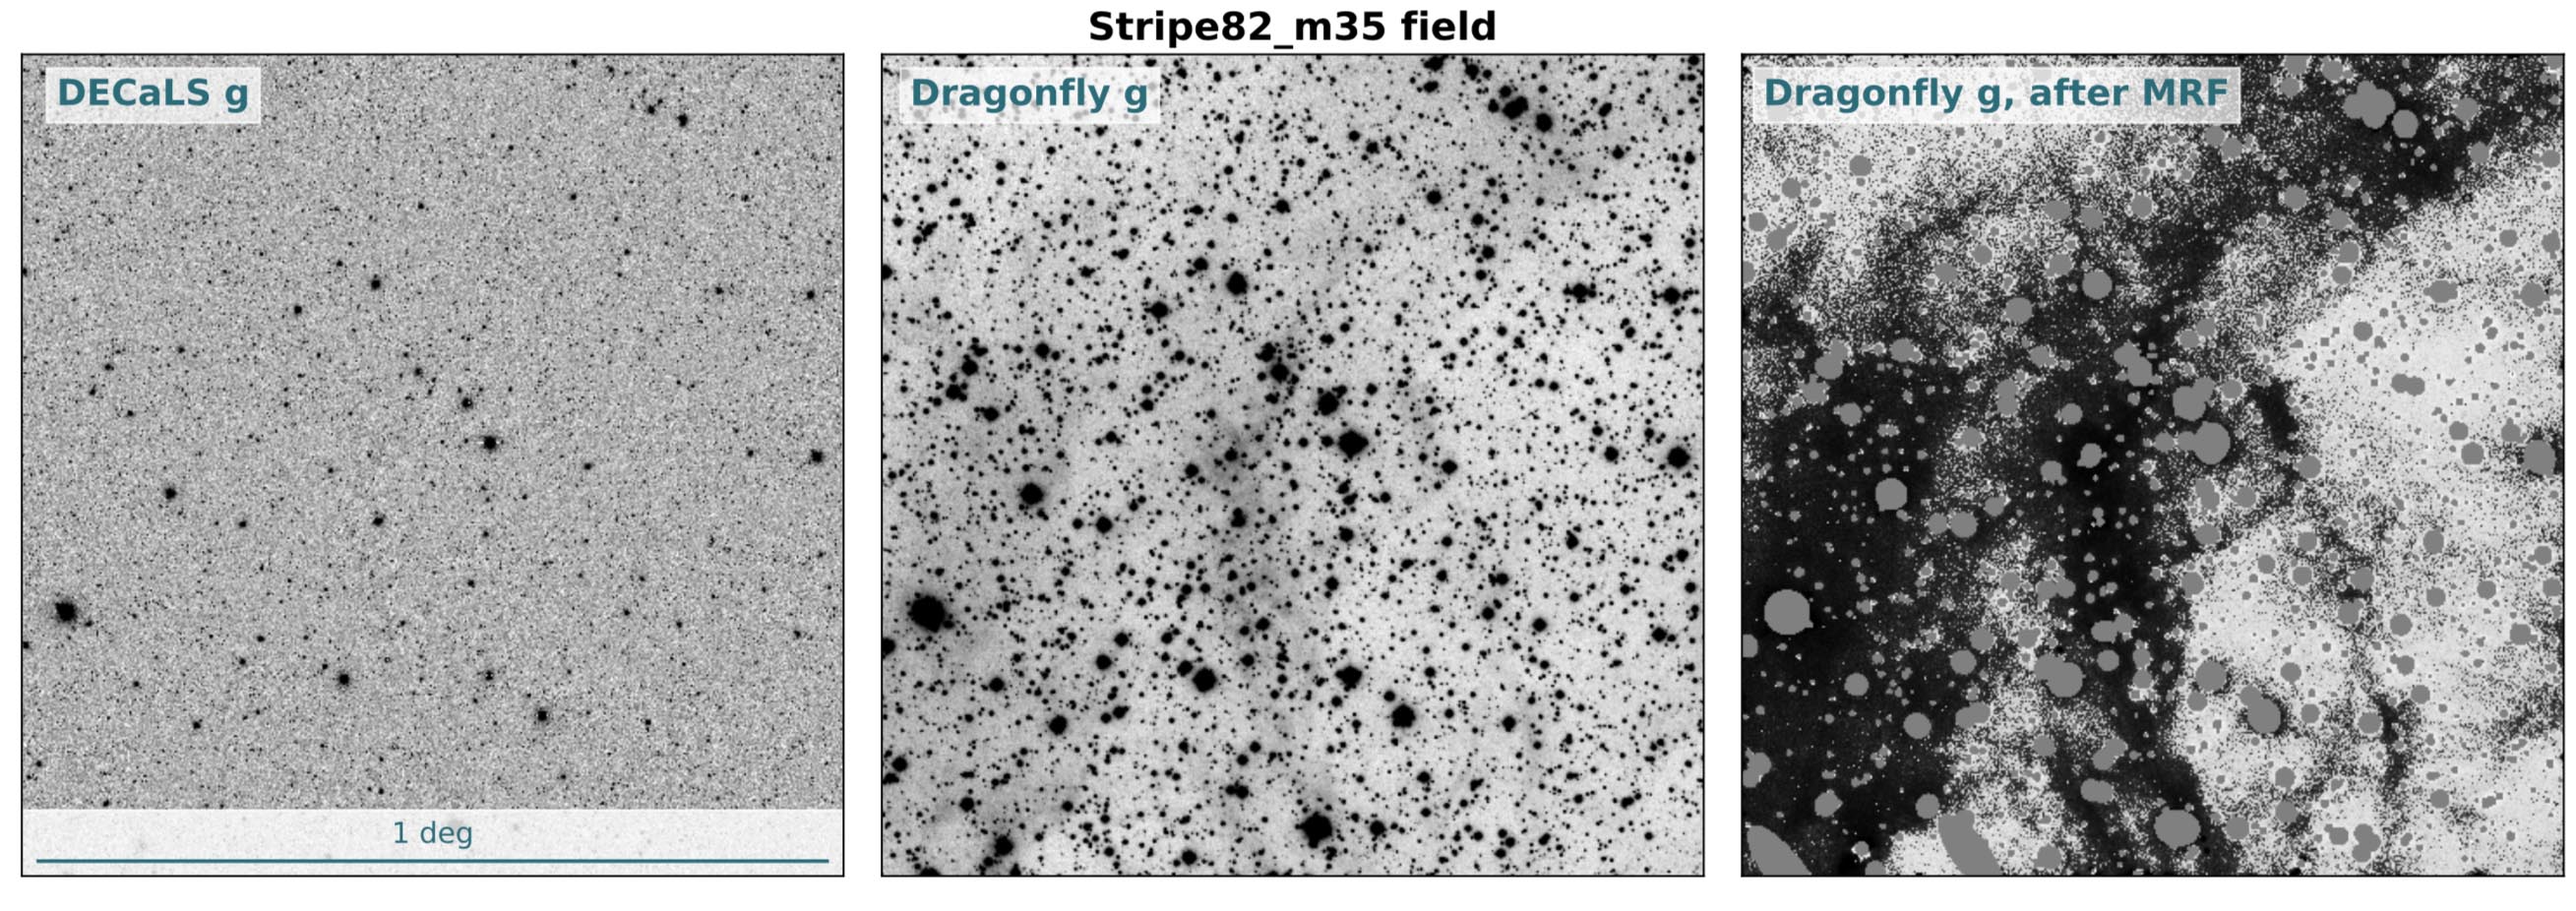 MRF reveals Galactic cirrus clearly in Dragonfly data (Danieli et al. 2019)